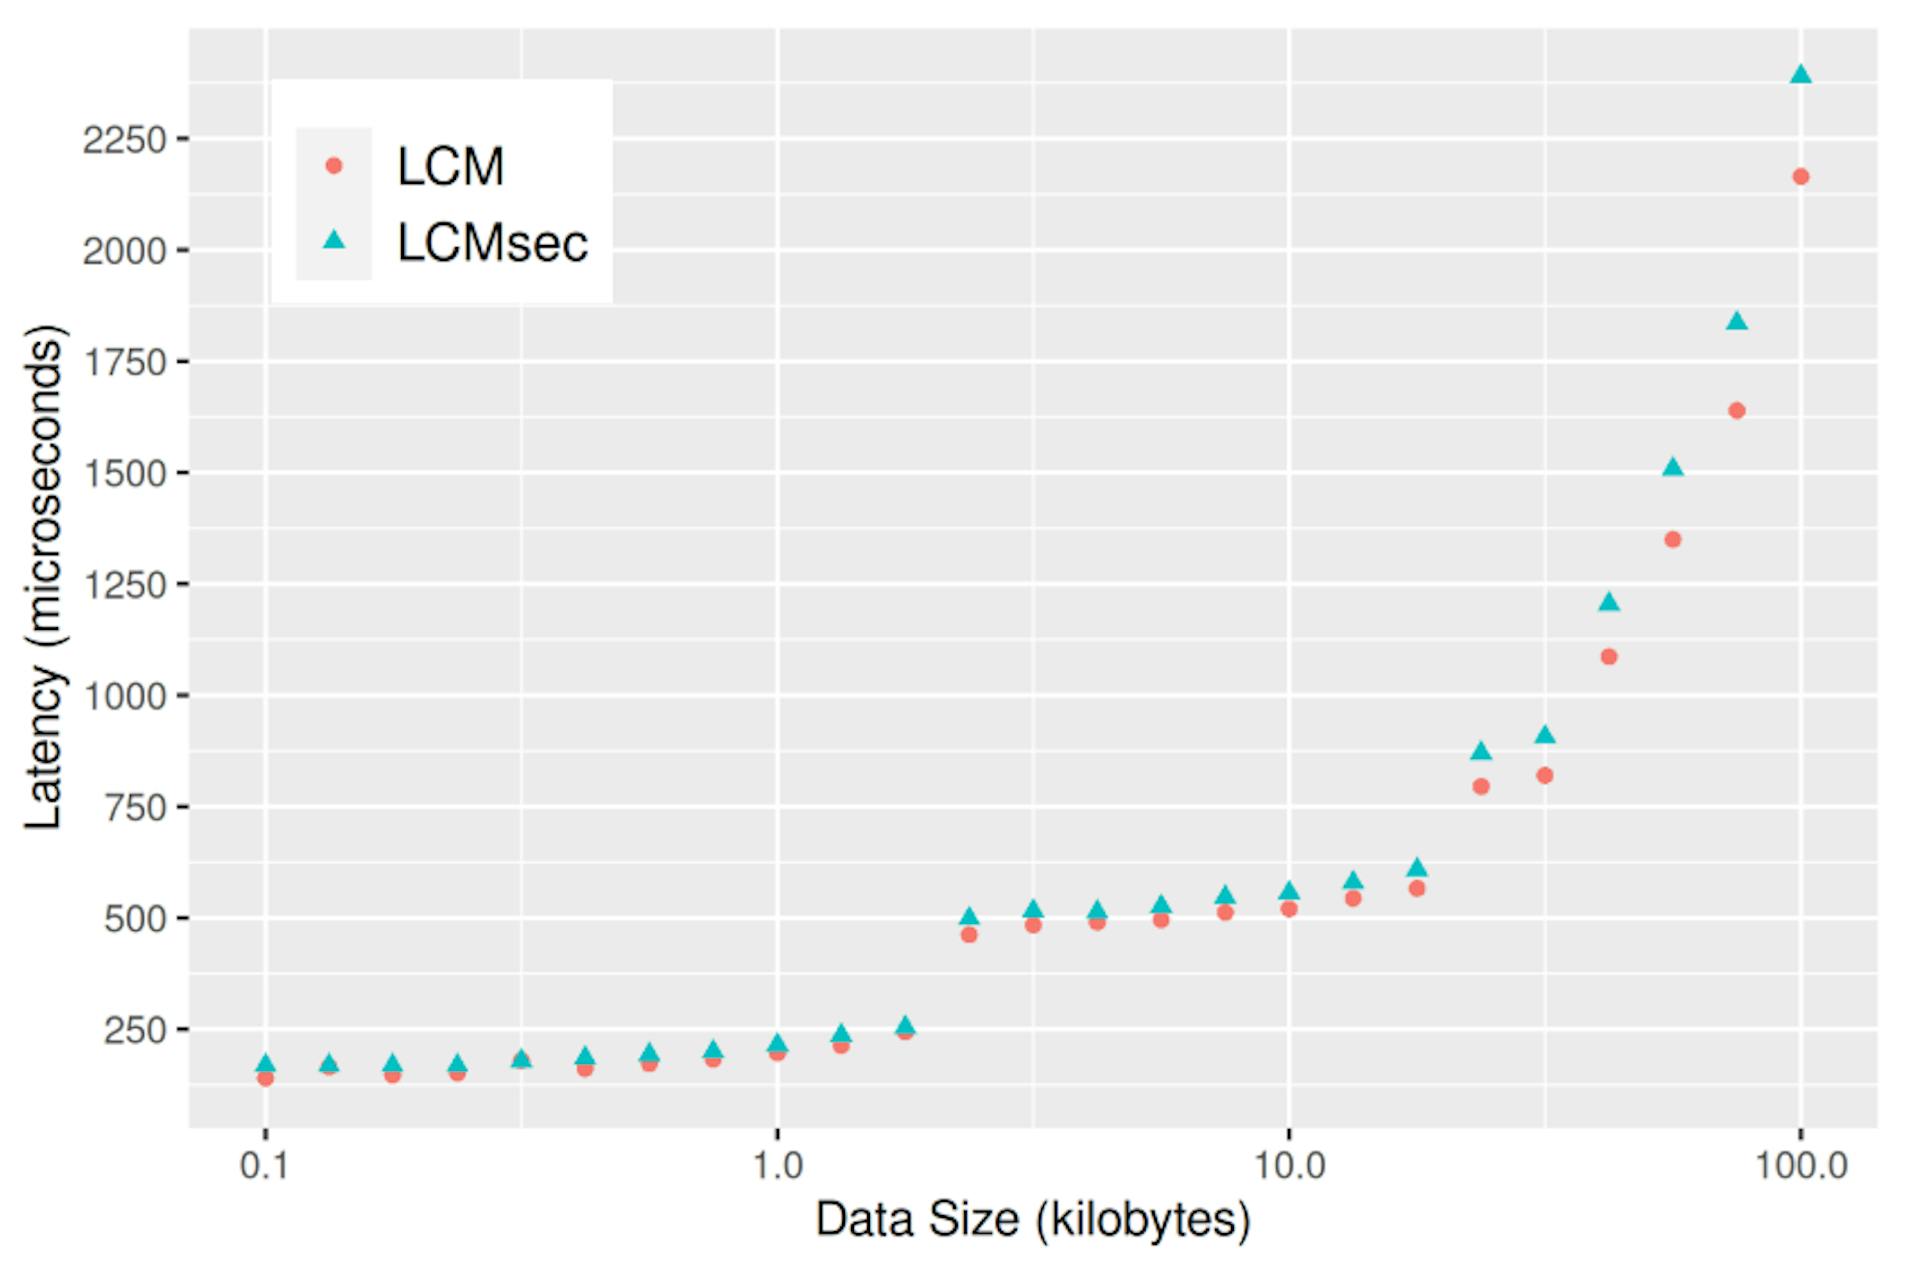 Fig. 8. Latency comparison between LCM and LCMsec